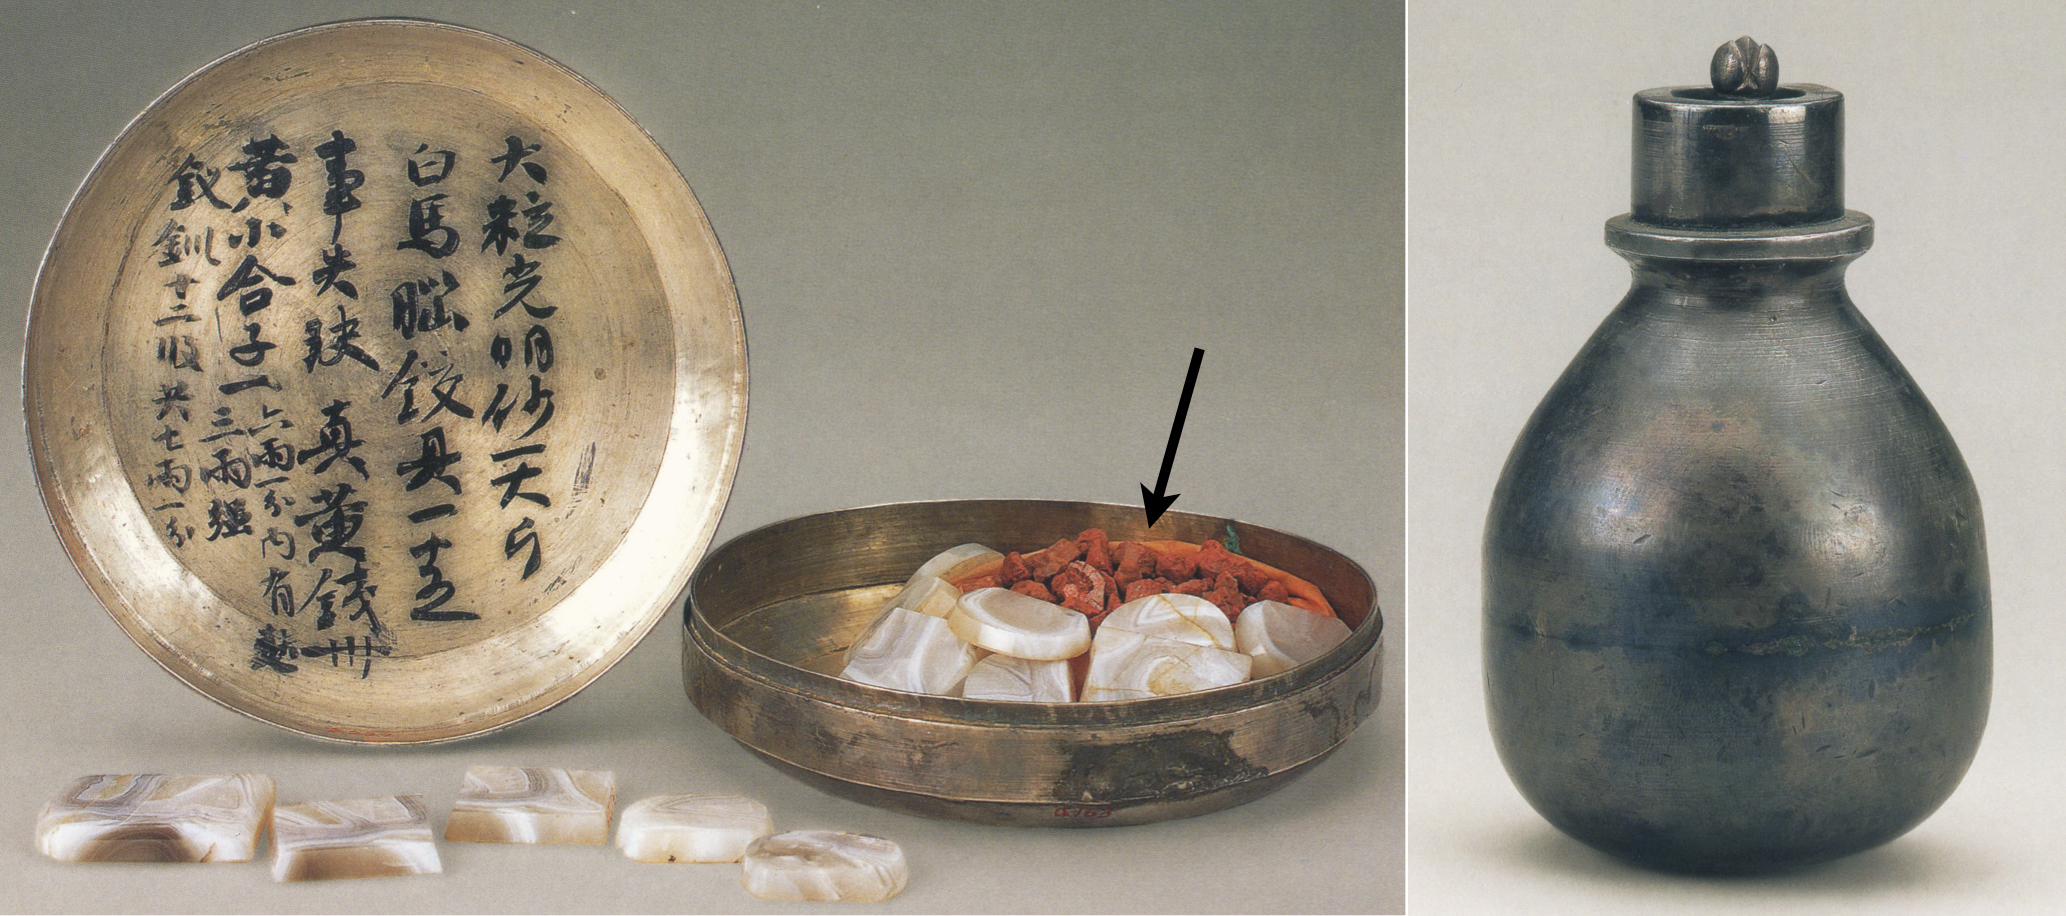 Two photographs of cinnabar and an alchemical utensil. On the left is a photograph of a round, shallow, silver box containing a dozen pieces of red cinnabar (indicated by an arrow) and a dozen small pieces of flat, tile-shaped, white agate both inside and outside the box. On the lid of the box are Chinese characters describing the name and amount of the cinnabar and other items in the box. On the right is a picture of a pomegranate-shaped silver jar.